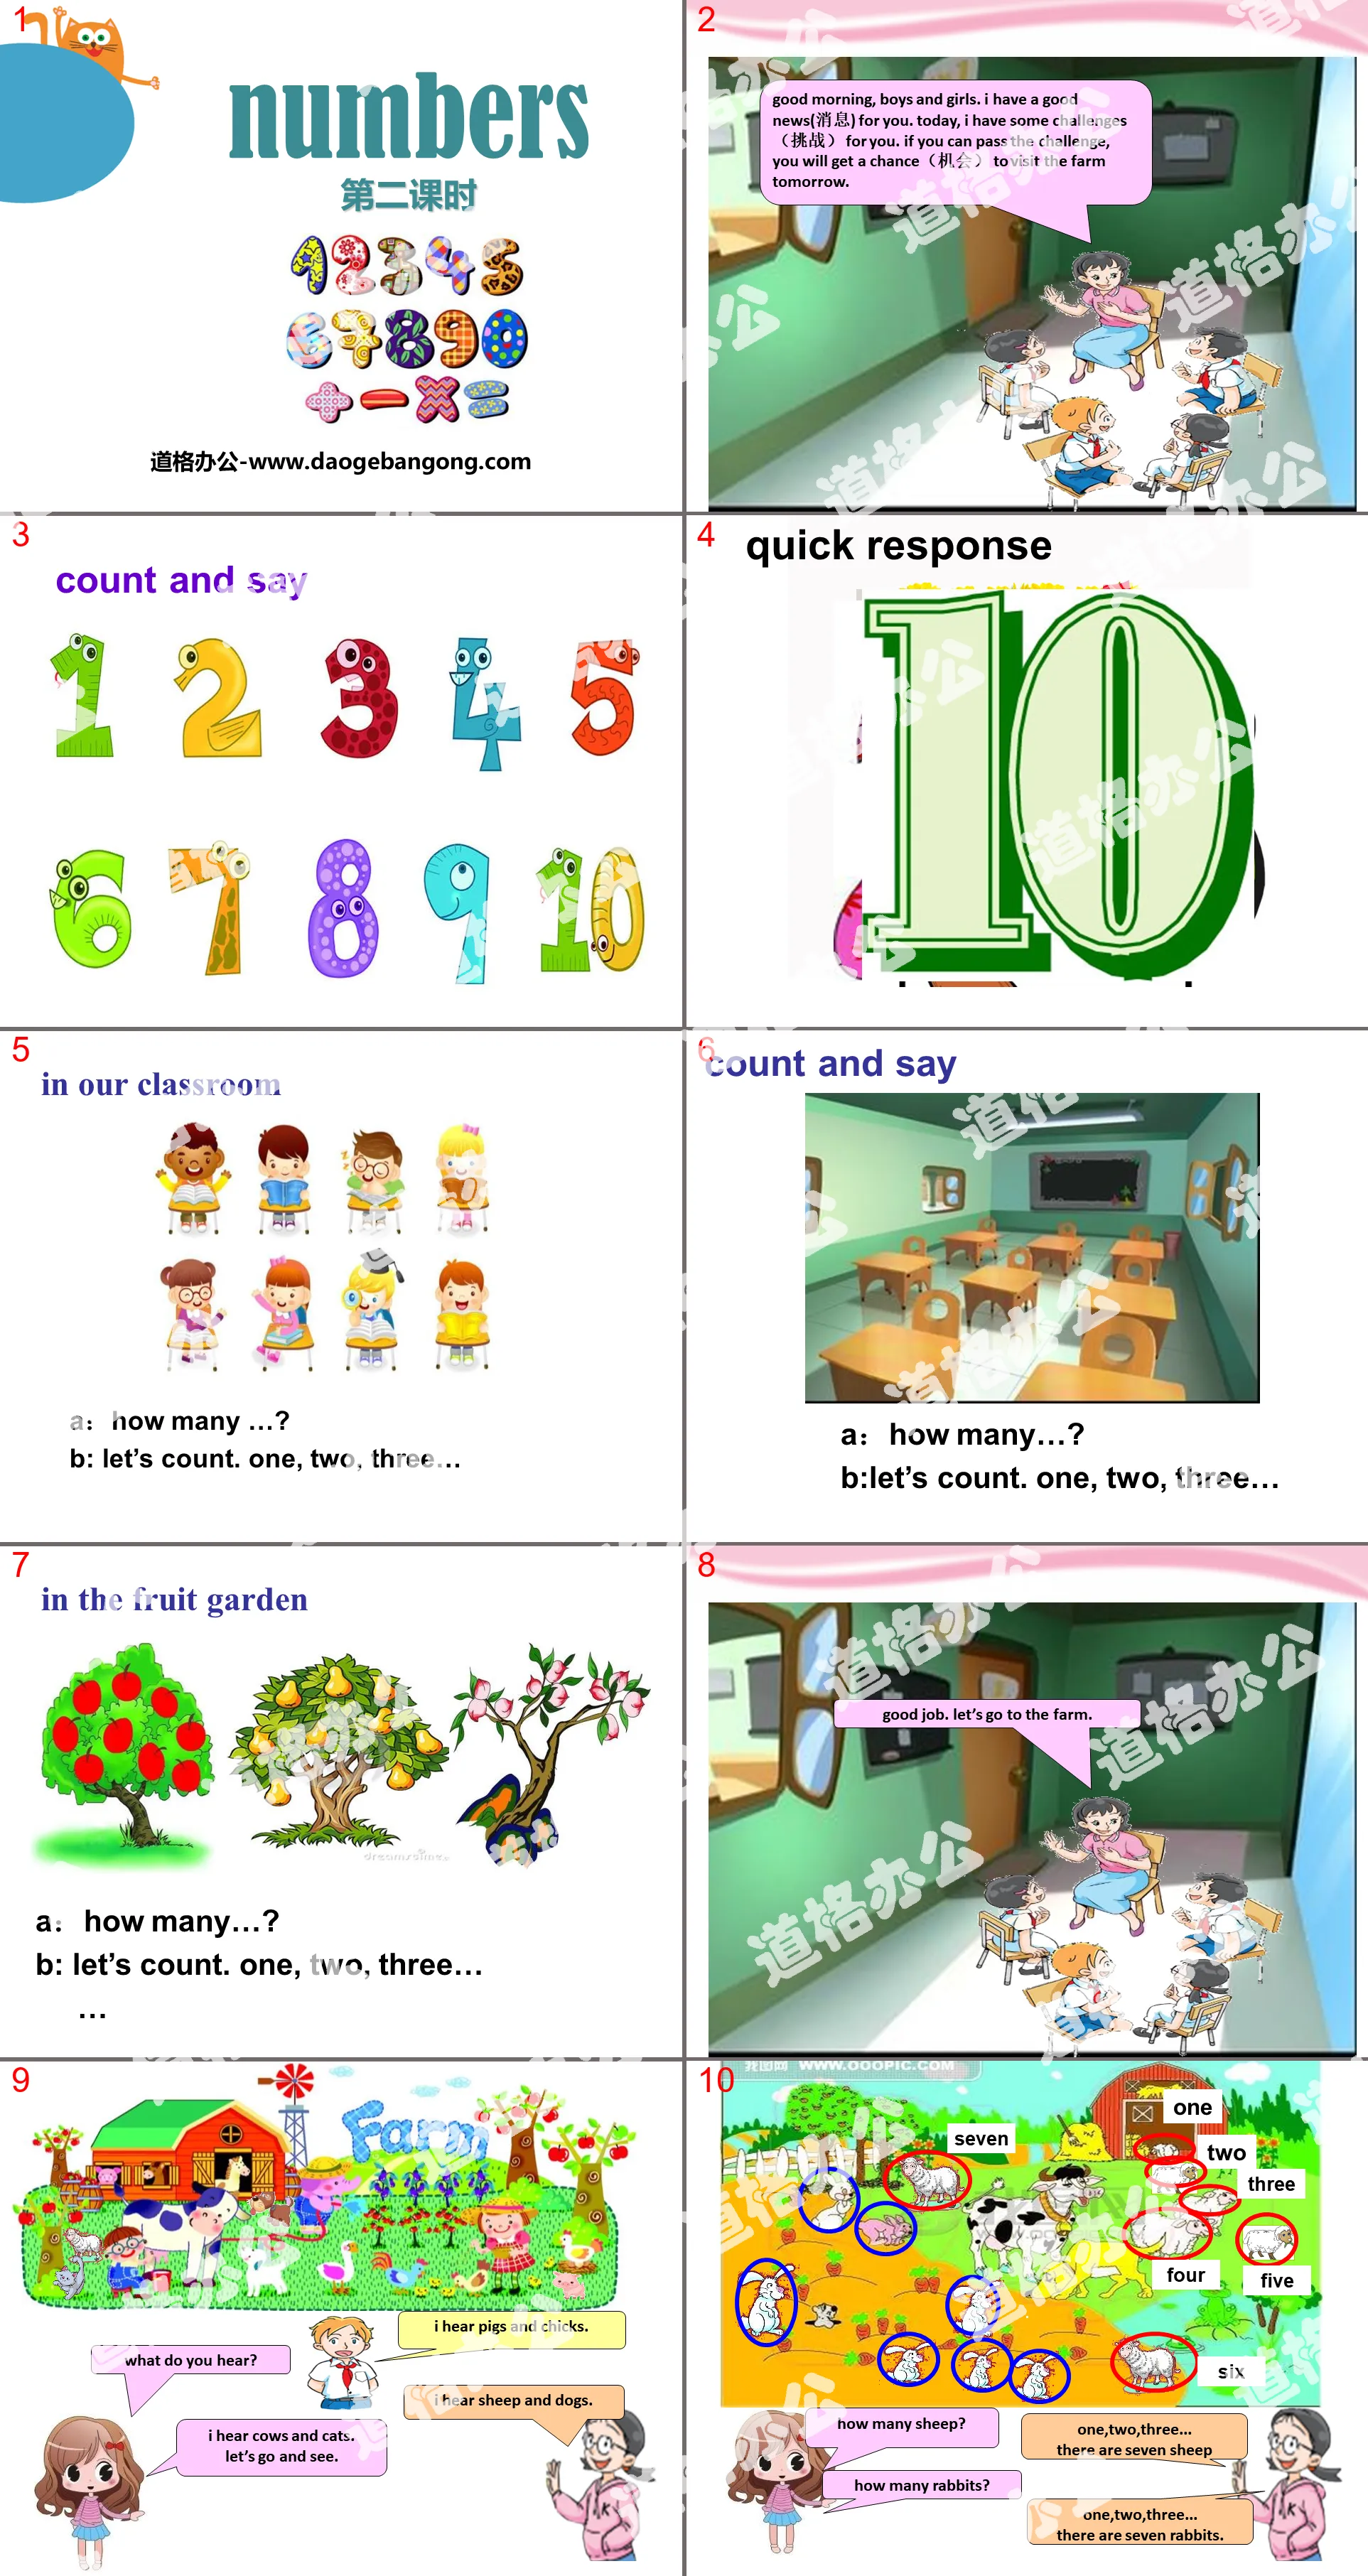 "Numbers" PPT courseware